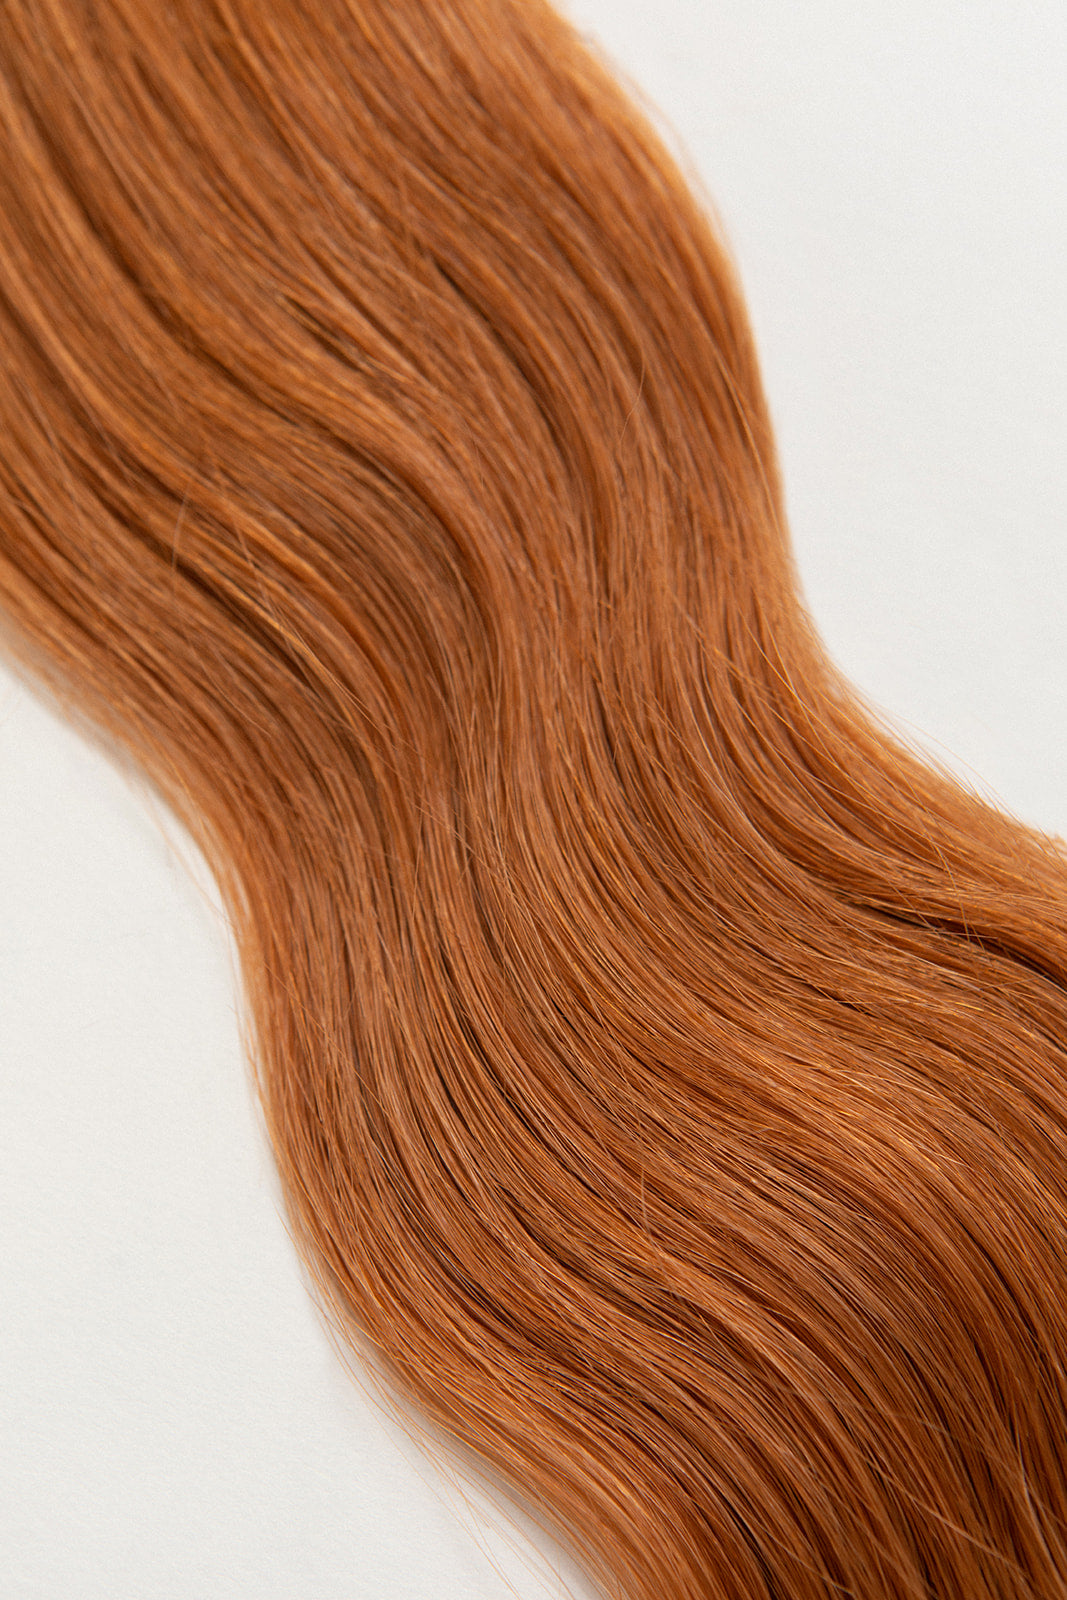 Sandalwood is our brightest copper tone. You want Thingamabobs? You’ll have plenty. Release your inner Ariel.  Stylist lingo: Copper/gold level 7 Harloc Tape-In Extensions are made from ethically sourced, premium, Remy Slavic Hair. These reusable hair extensions can be used to add length, volume, chemical-free colour, or to correct or enhance a haircut. Available in 16 beautiful shades. Combine multiple colours to create a custom colour blend and perfect match.